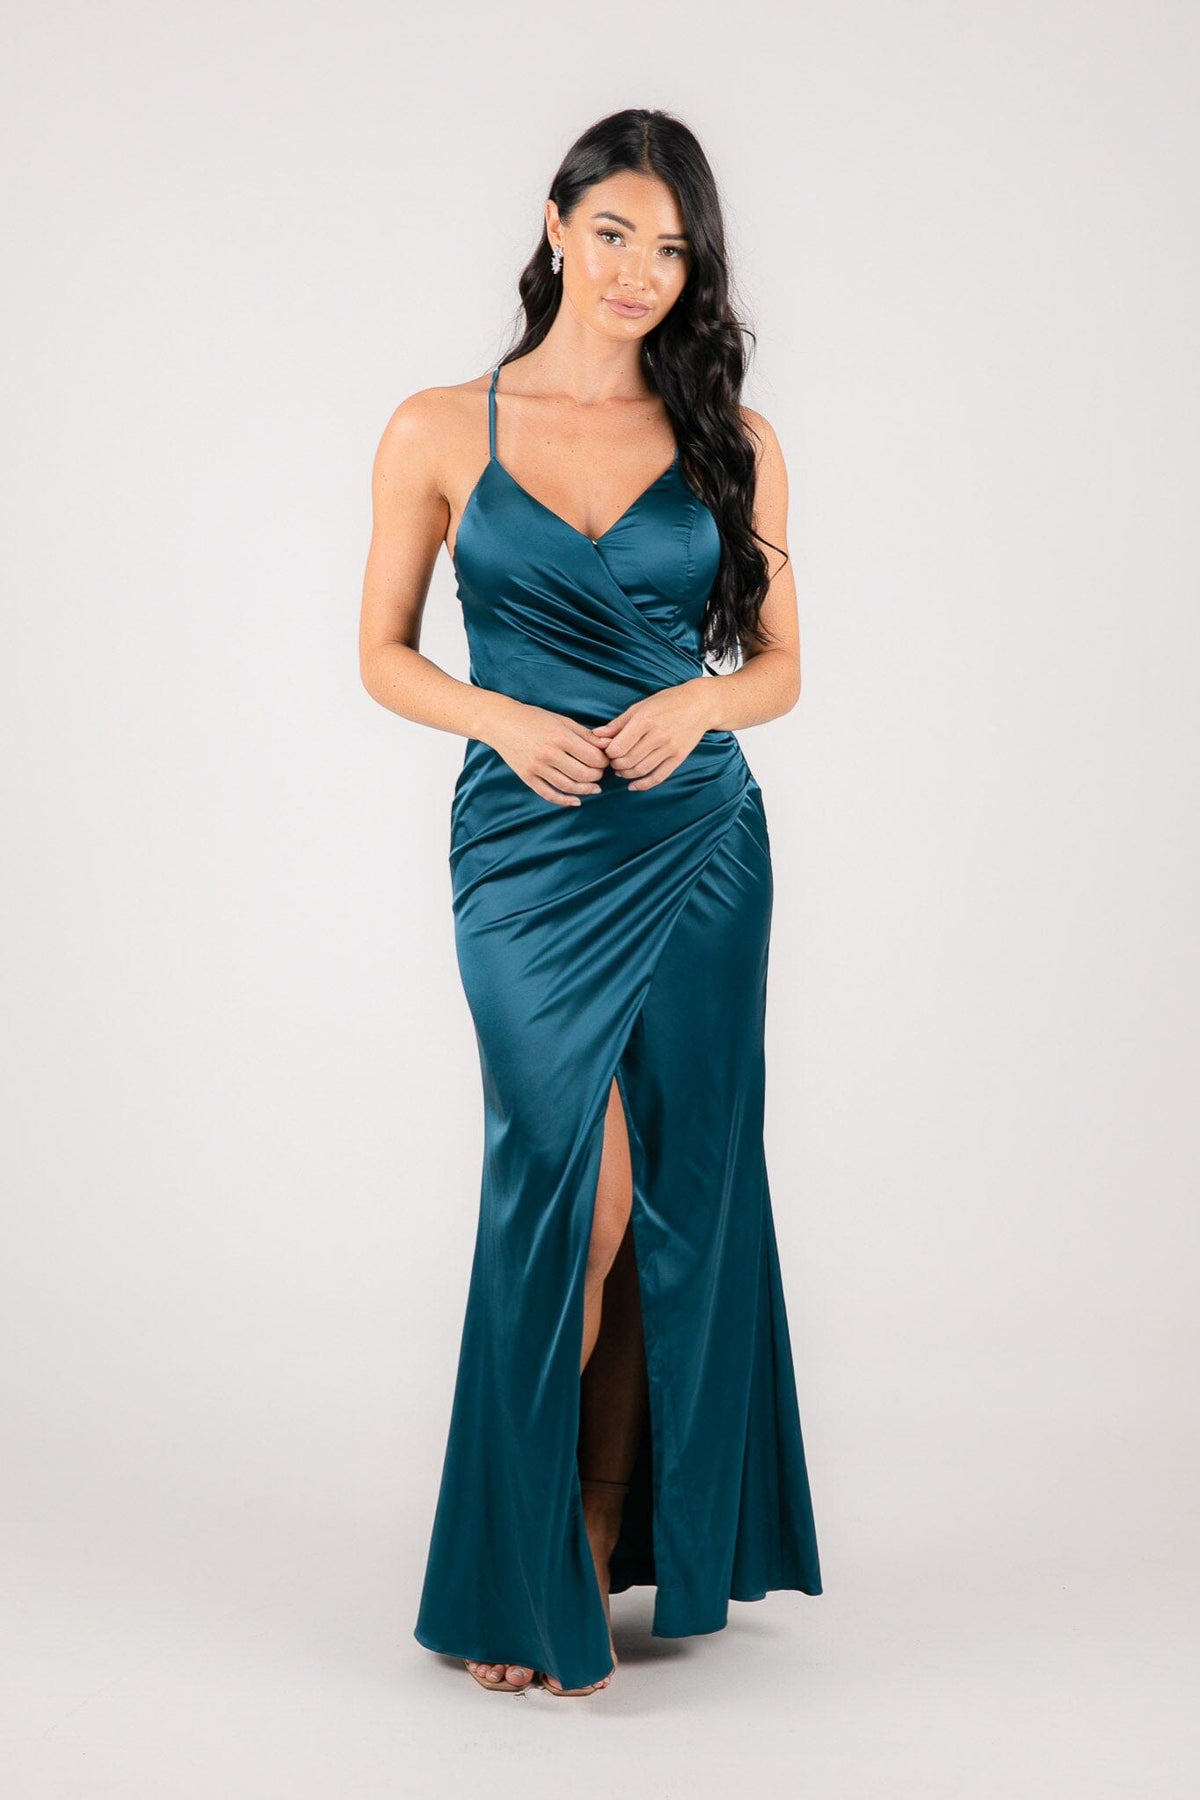 Satin Maxi Dress with V Neckline and Front Split in Teal Green